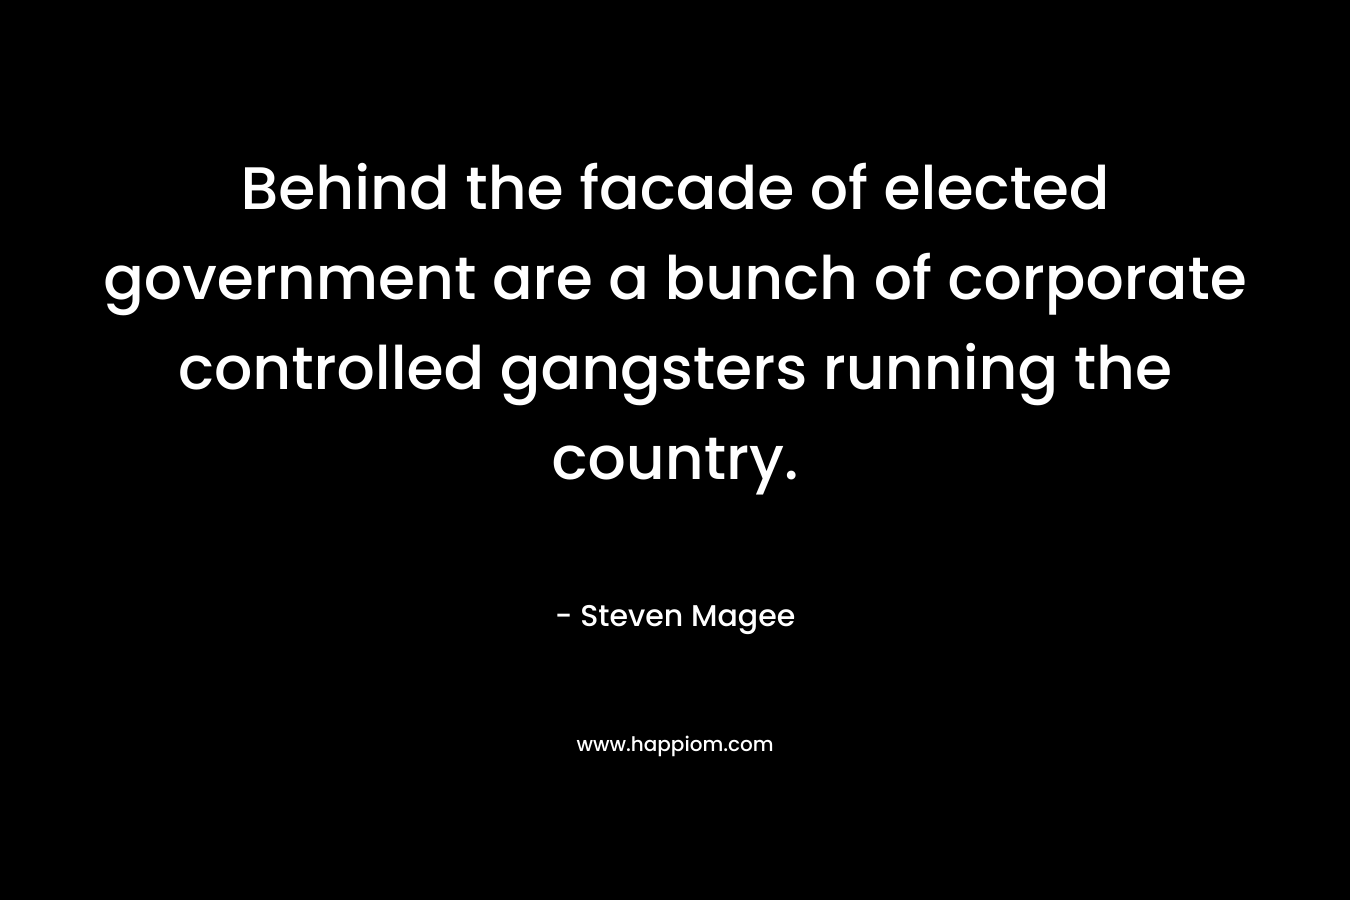 Behind the facade of elected government are a bunch of corporate controlled gangsters running the country. – Steven Magee